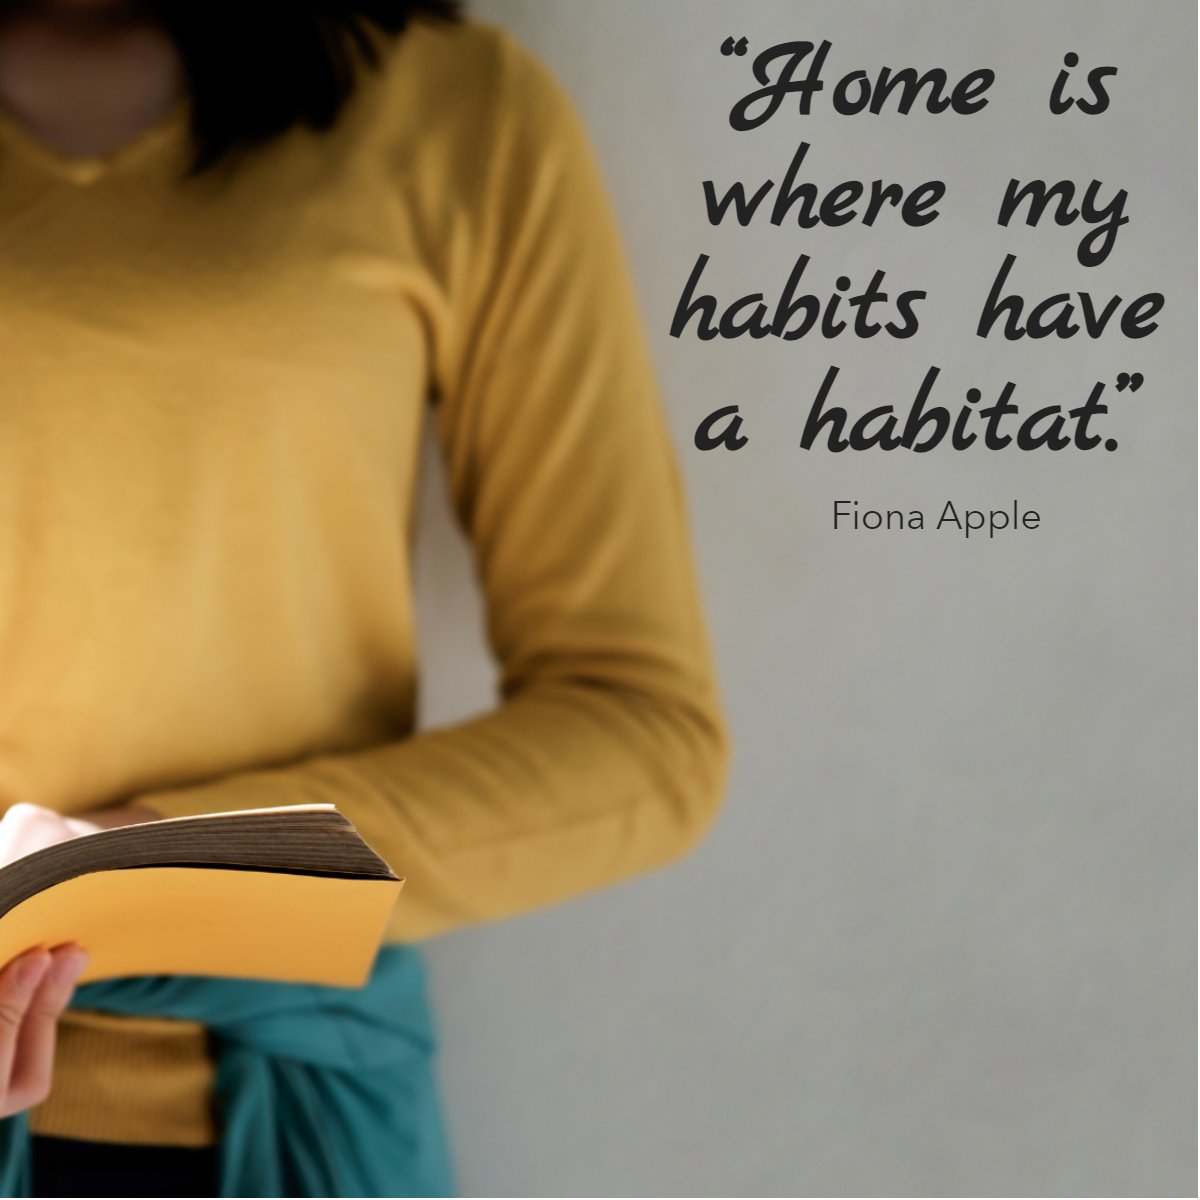 'Home is where my habits have a habitat.' 
― Fiona Apple 📖

#habits    #realestate    #realtor    #buy    #sell    #homeowner    #fun    #inspiring    #quoteoftheday    #fionaapple
#premierrealestatenetwork #pren #realestate #realtor #barrettrealestate #bre